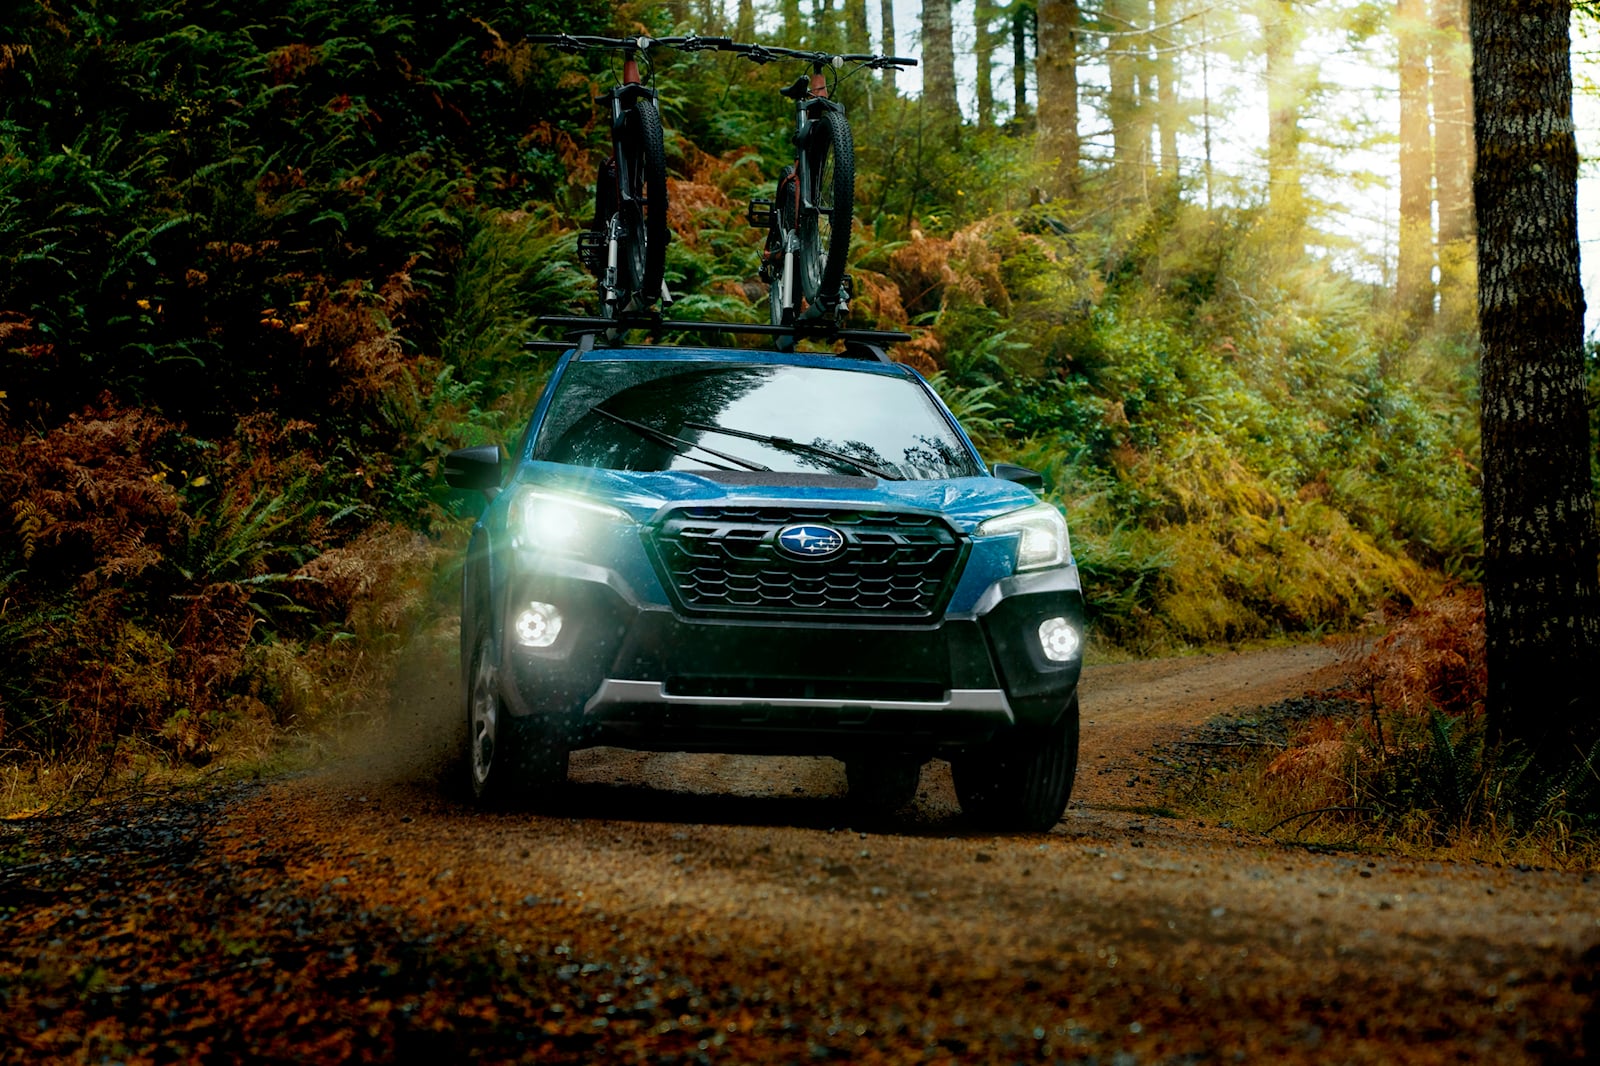 Subaru Reveals Pricing Of Its Most Affordable SUV